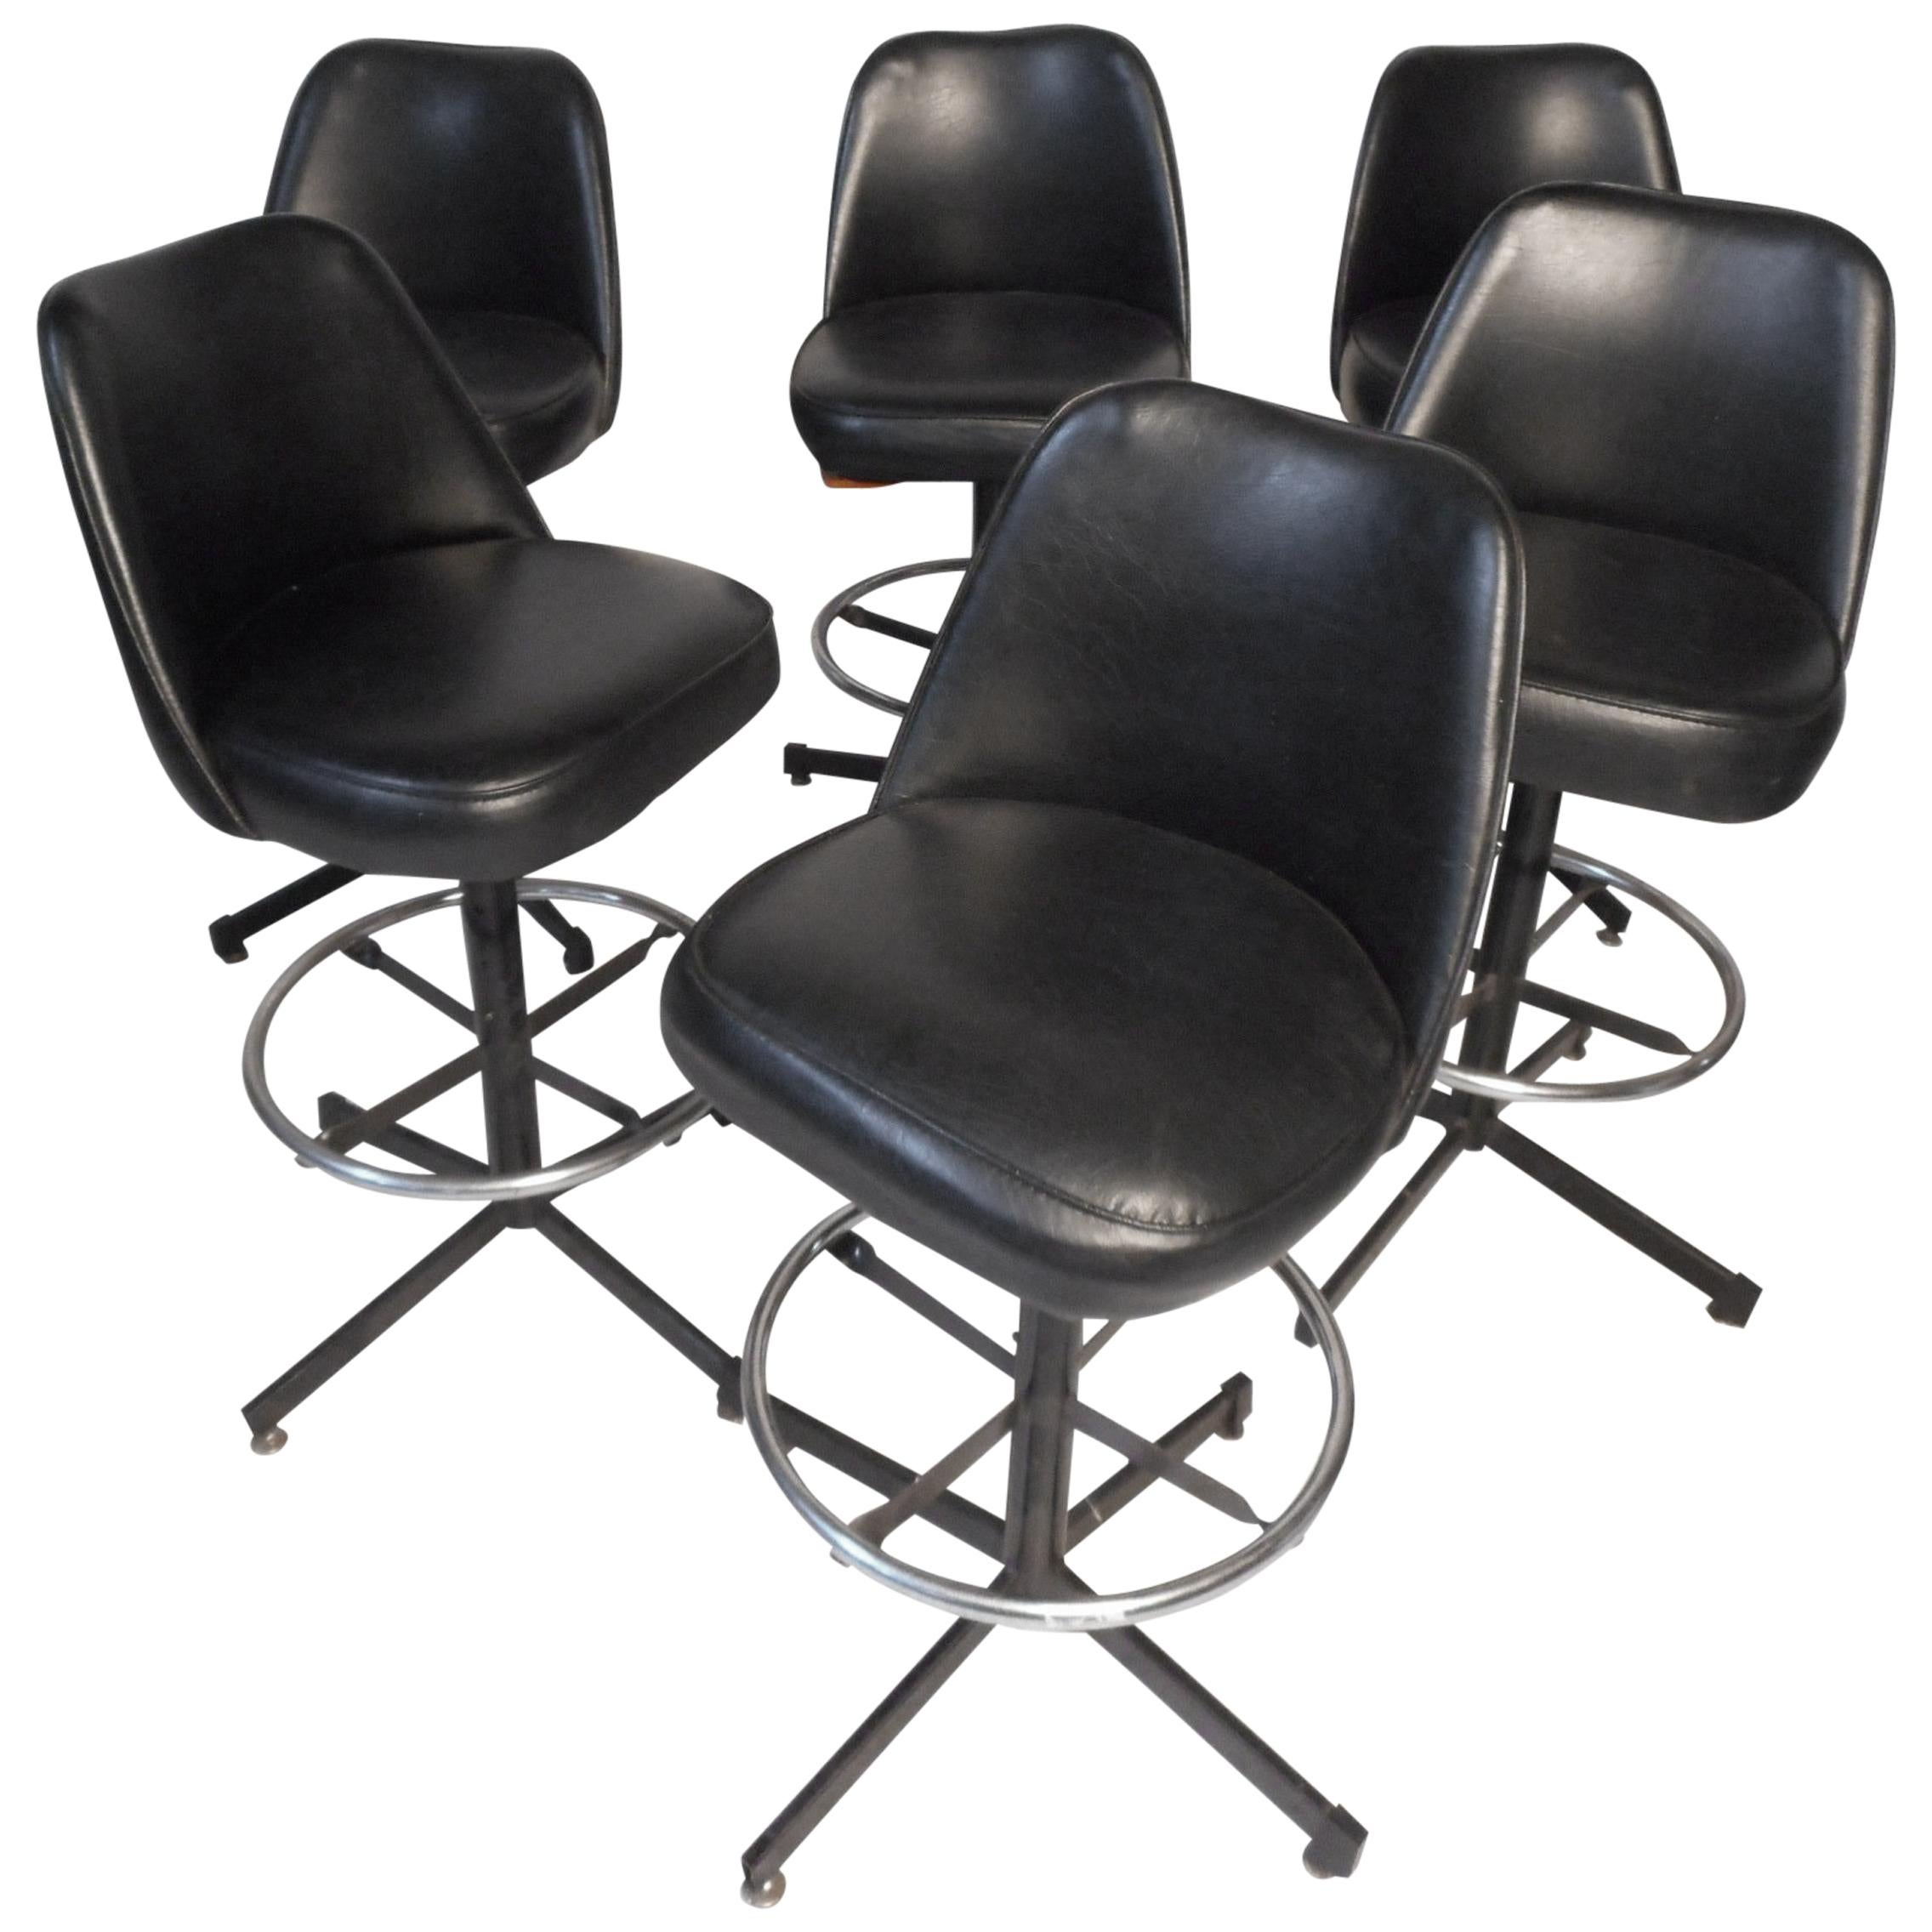 Set of 6 Adjustable Swivel Stools by Admiral Chrome Corp.